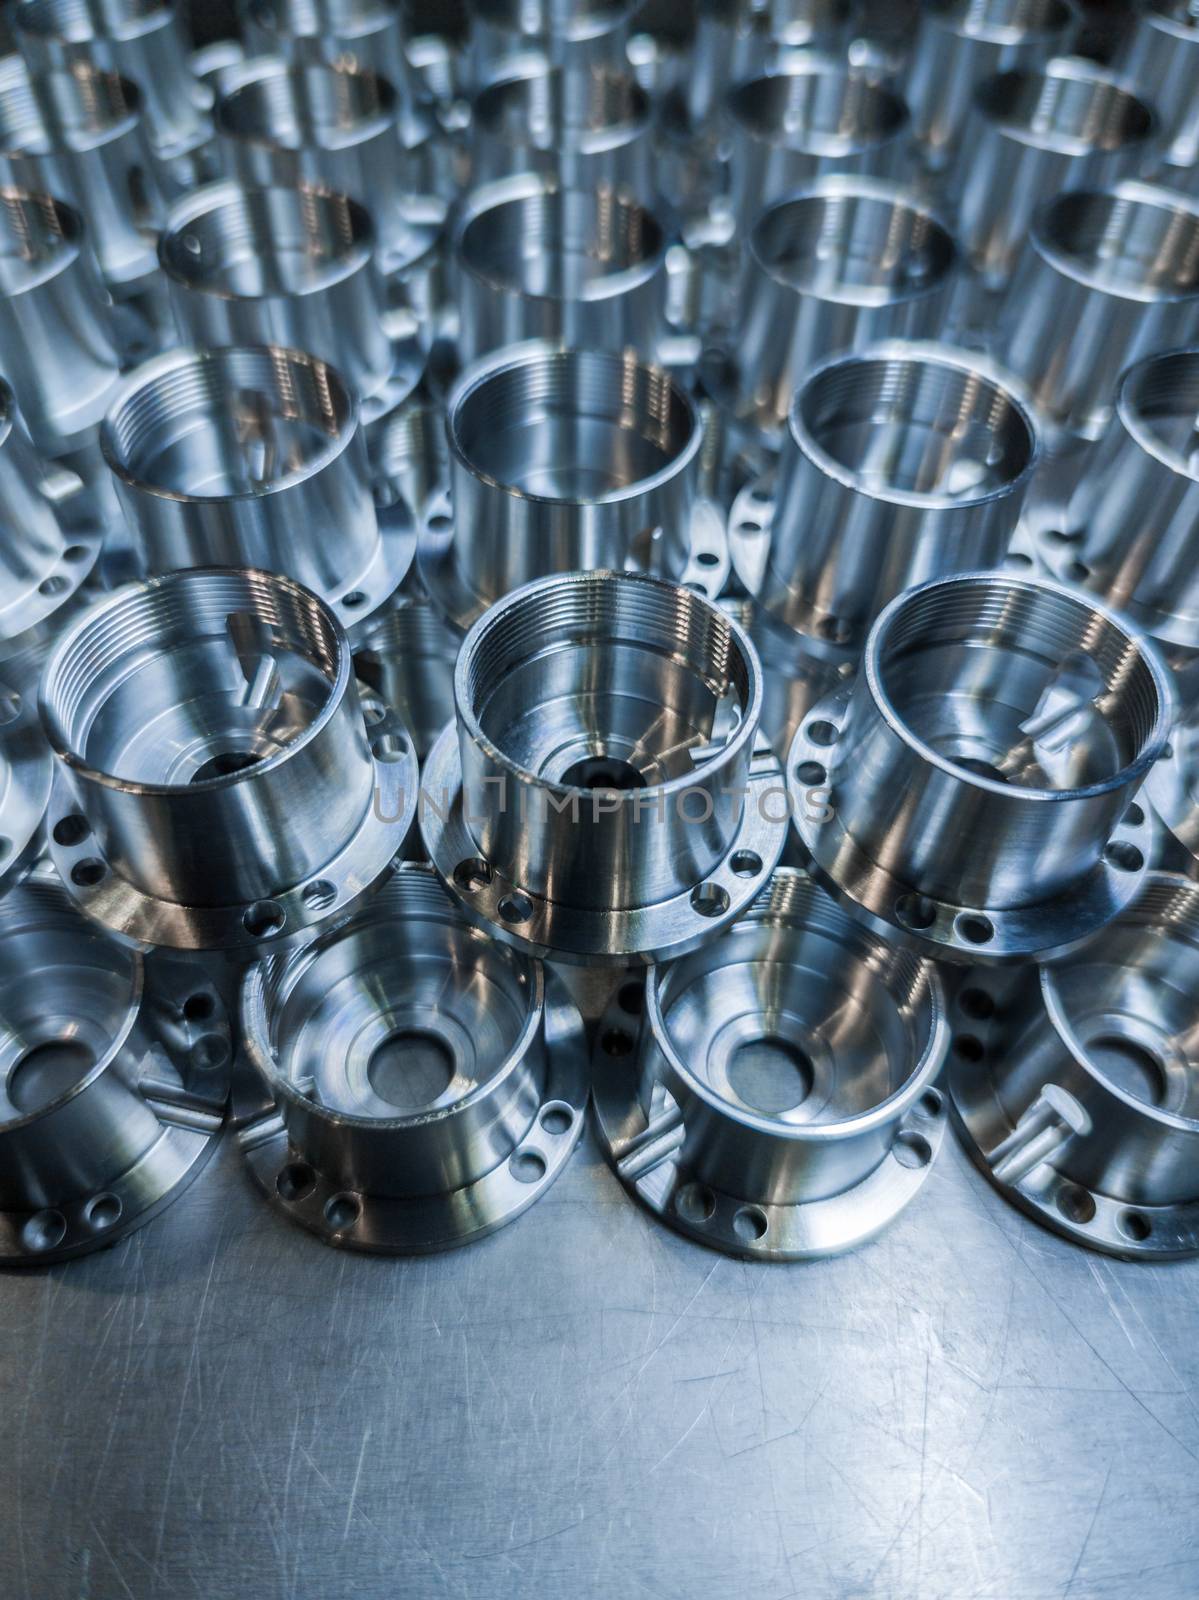 a batch of shiny metal cnc aerospace parts production - close-up with selective focus for industrial full frame manufacturing background.